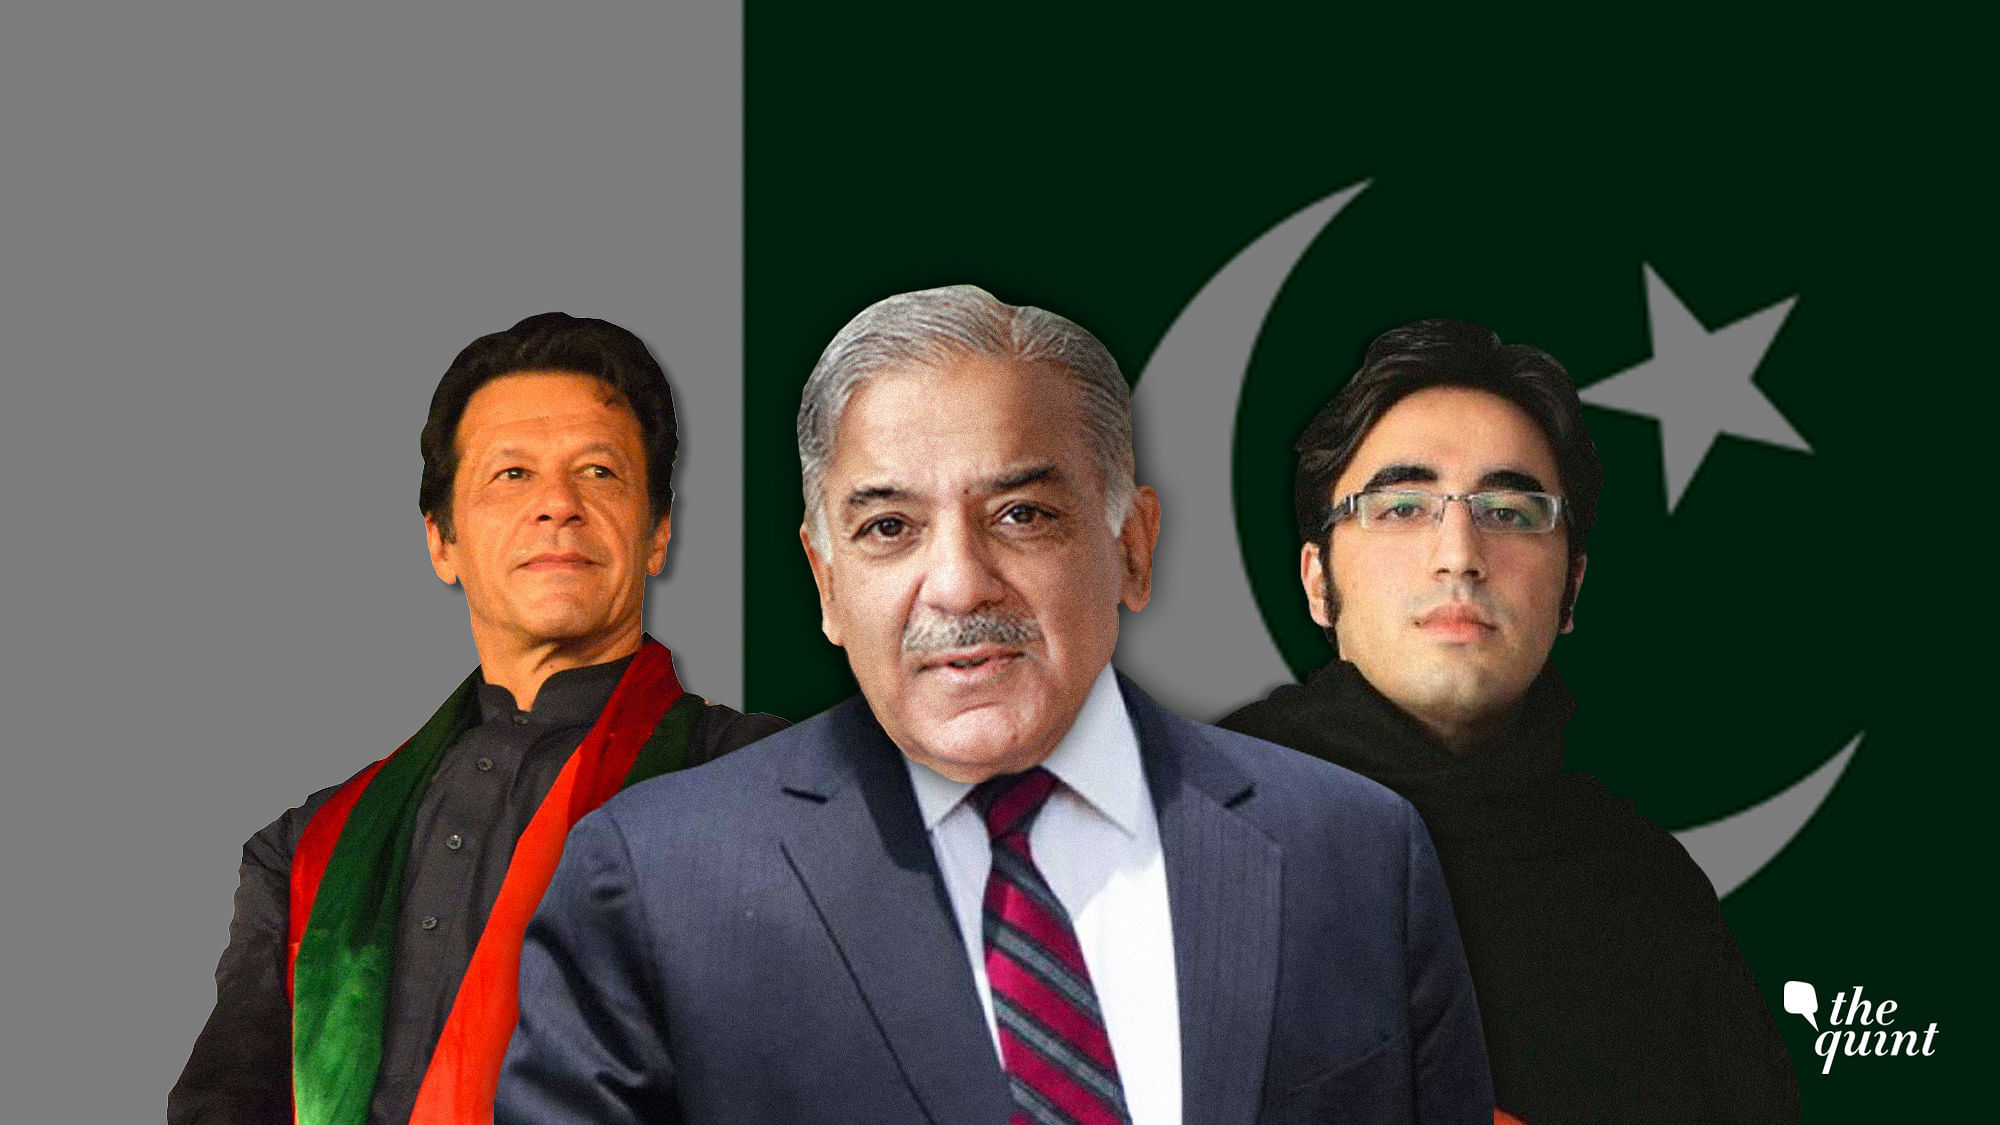 Imran Khan, Shahbaz Sharif and Bilawal Bhutto are fighting head-to-head in Pakistan elections.